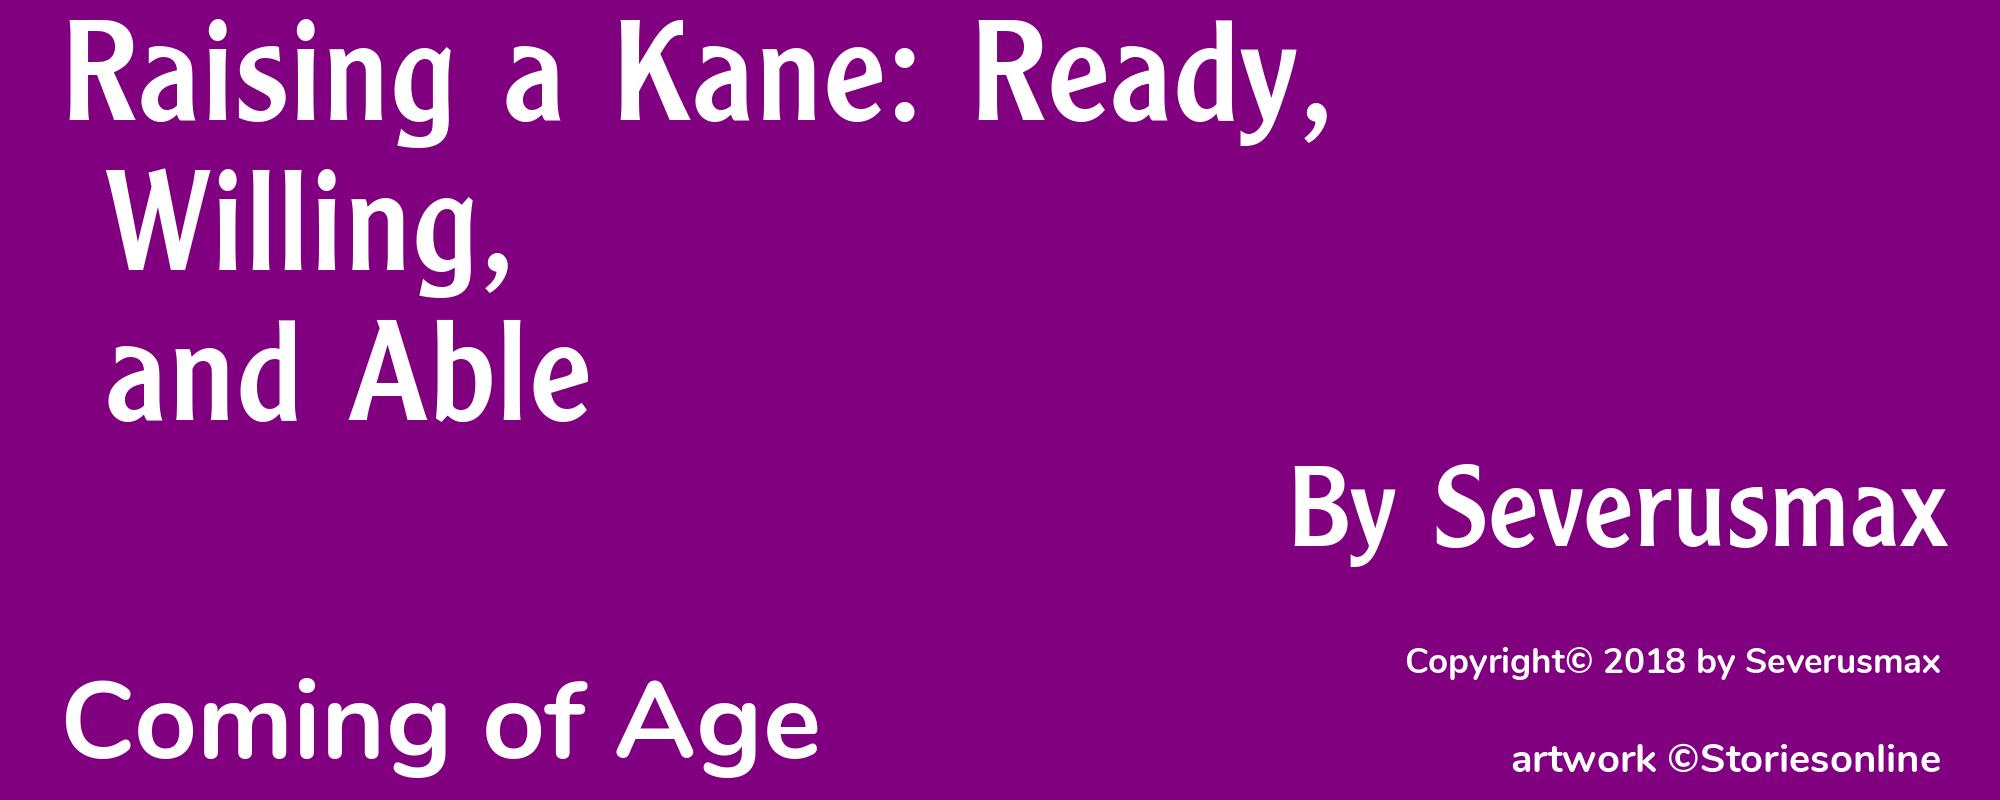 Raising a Kane: Ready, Willing, and Able - Cover